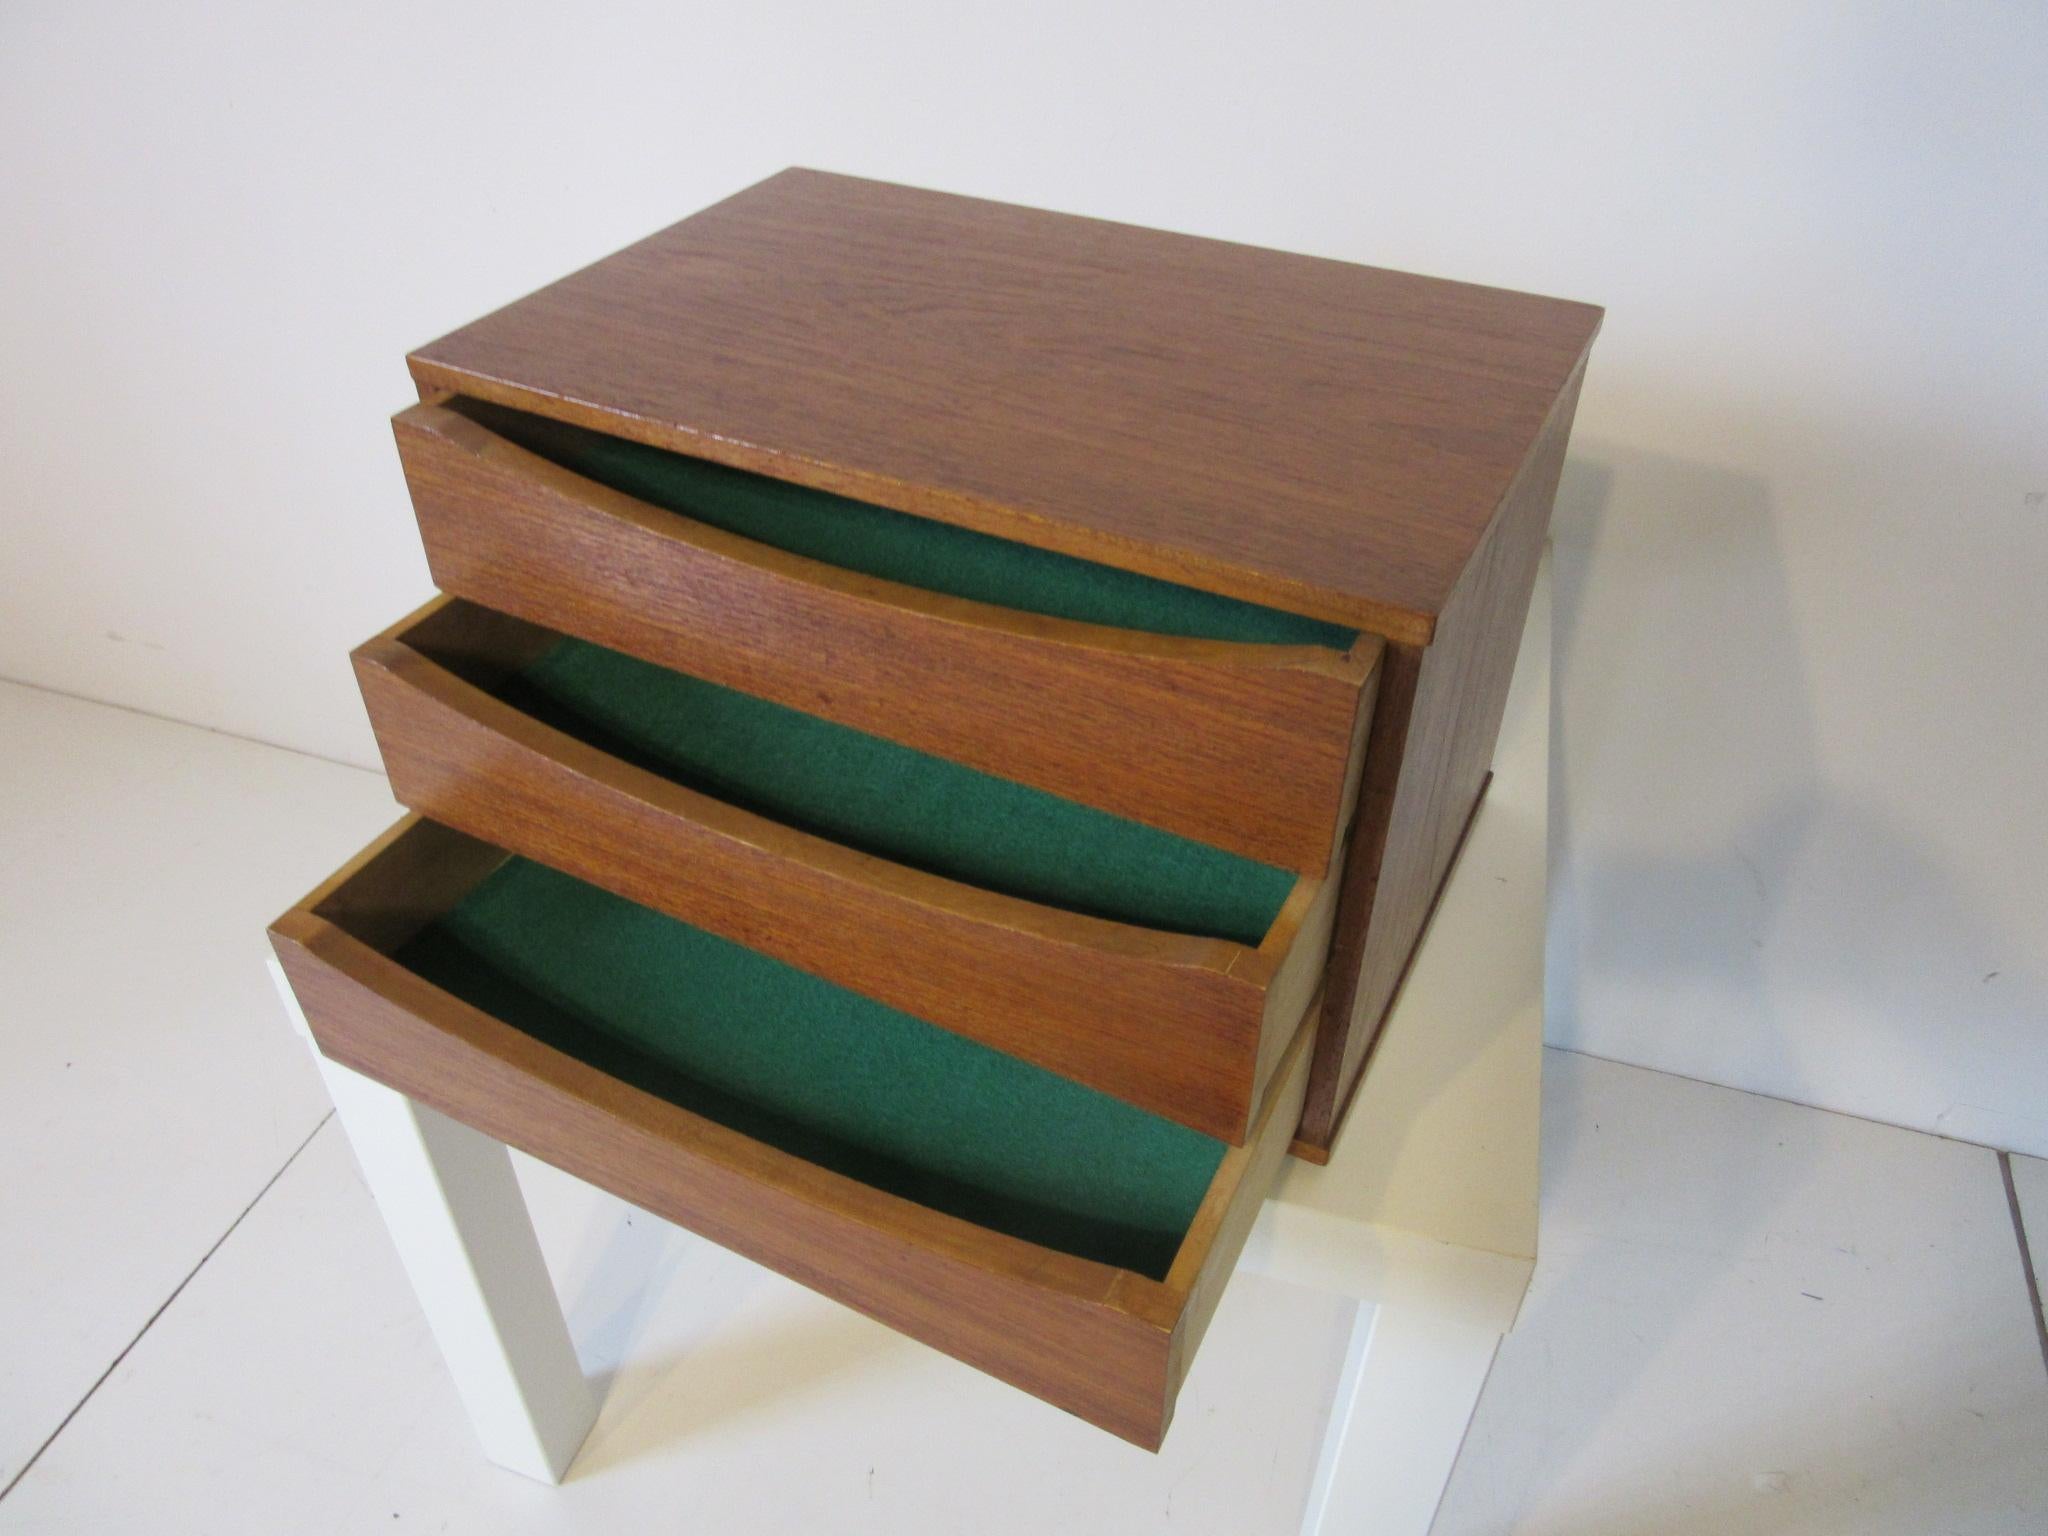 A simple three-drawer teak wood jewelry or watch box / chest with Vodder's signature cut away designed arched drawer pulls, lined in felt and ready for your precious jewelry or watches, made in Denmark.